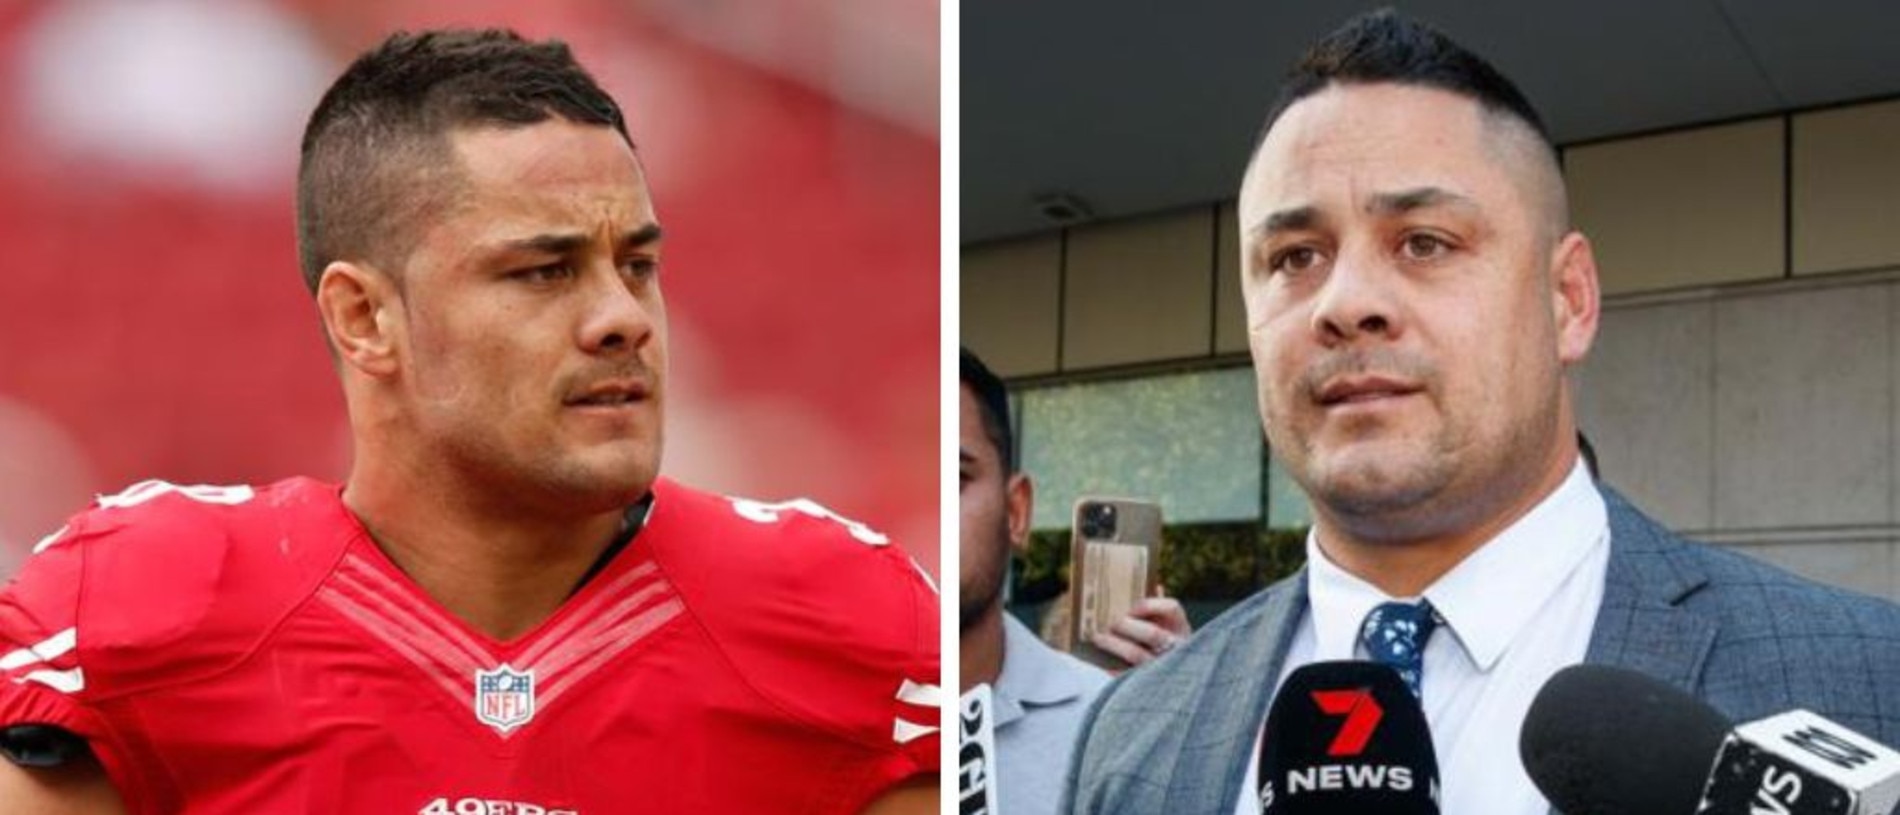 Jarryd Hayne request to watch San Francisco 49ers vs Kansas City Chiefs Super  Bowl in jail denied by authorities